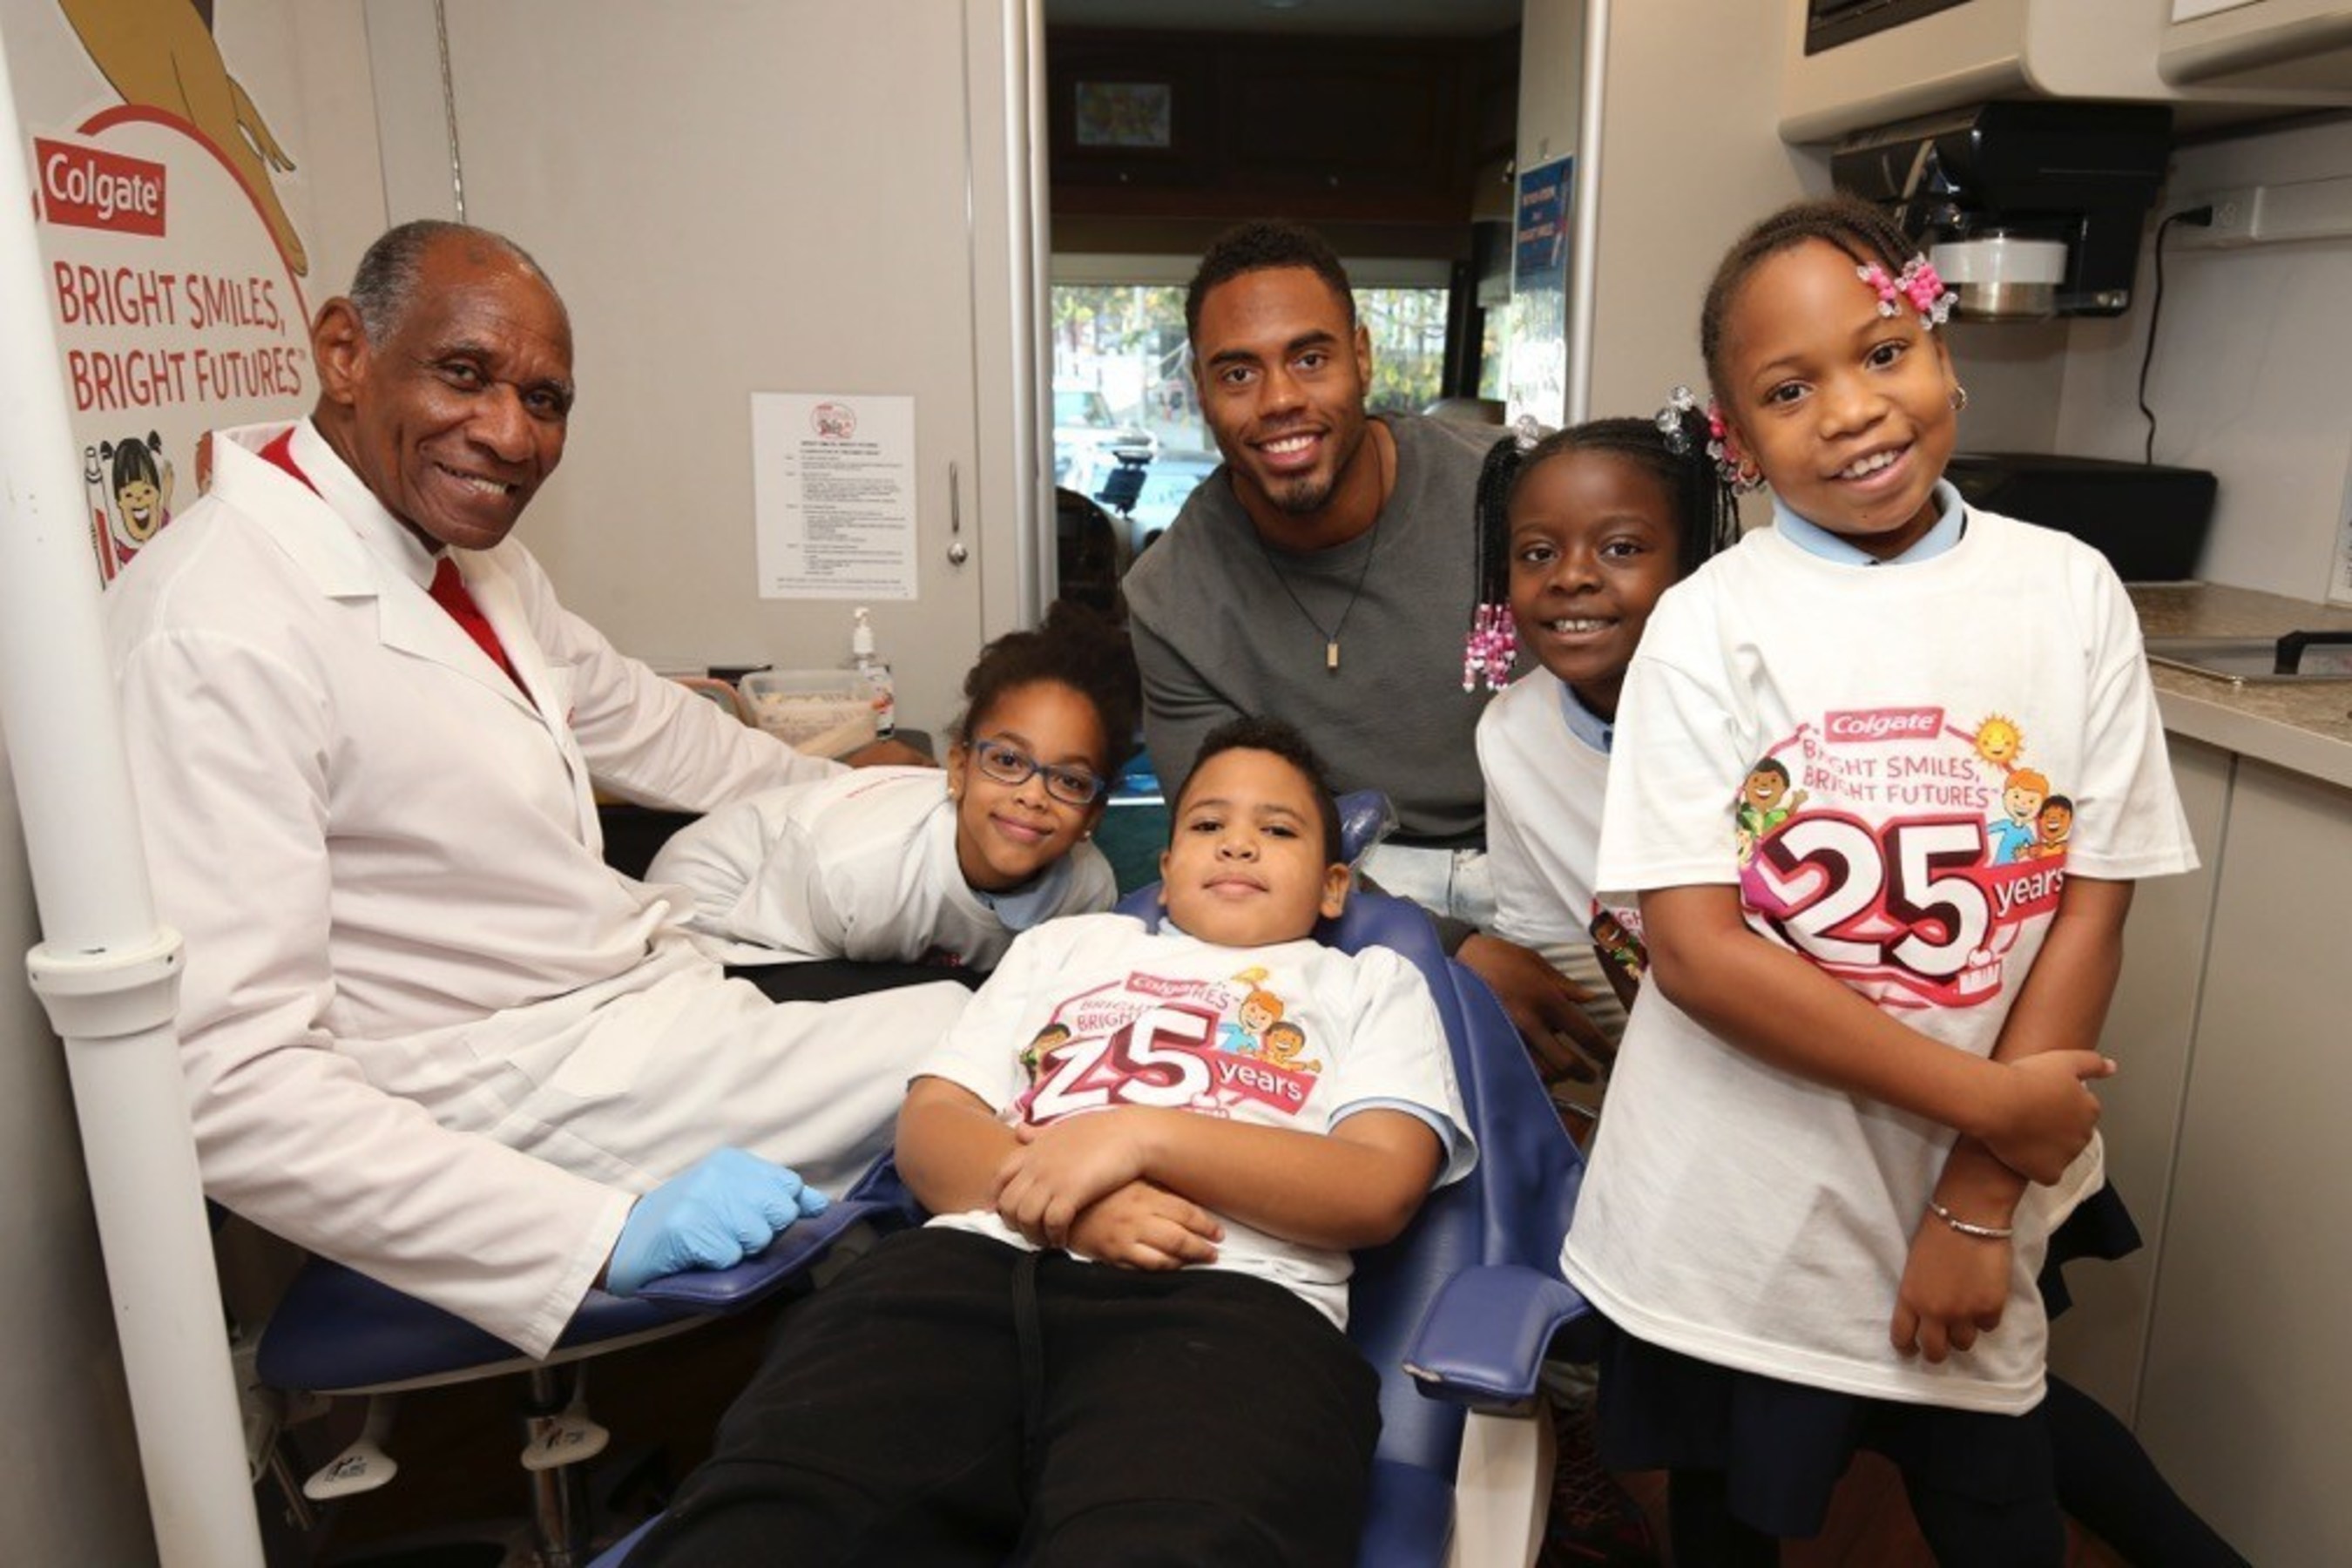 New York Giants running back Rashad Jennings (center) and Dr. Paul Martin (far left), a Colgate Bright Smiles, Bright Futures dental professional coordinator, remind P.S./I.S. 76 students about the importance of maintaining good oral health habits during the Bright Smiles, Bright Futures 25th Anniversary celebration in New York City. (Mark Von Holden/AP Images for Colgate Bright Smiles, Bright Futures)